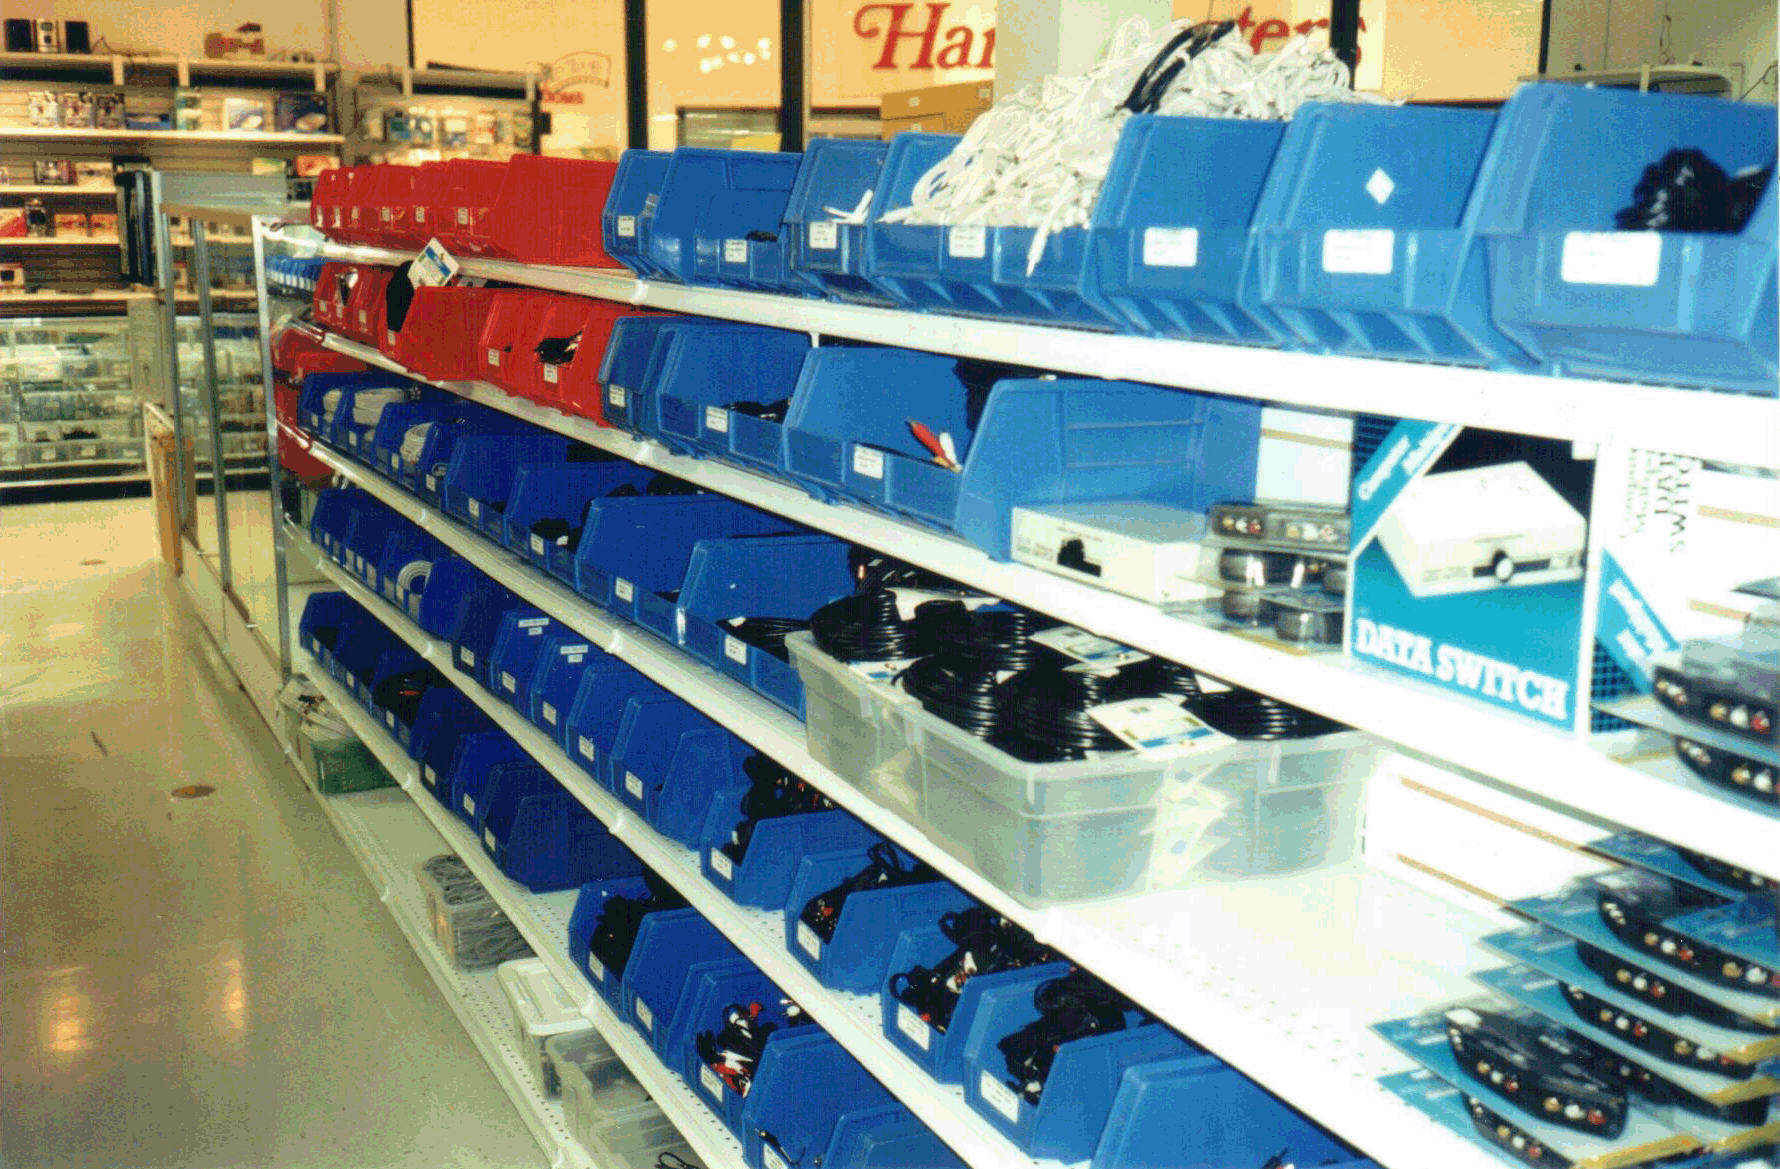 Another aisle at vetco 3